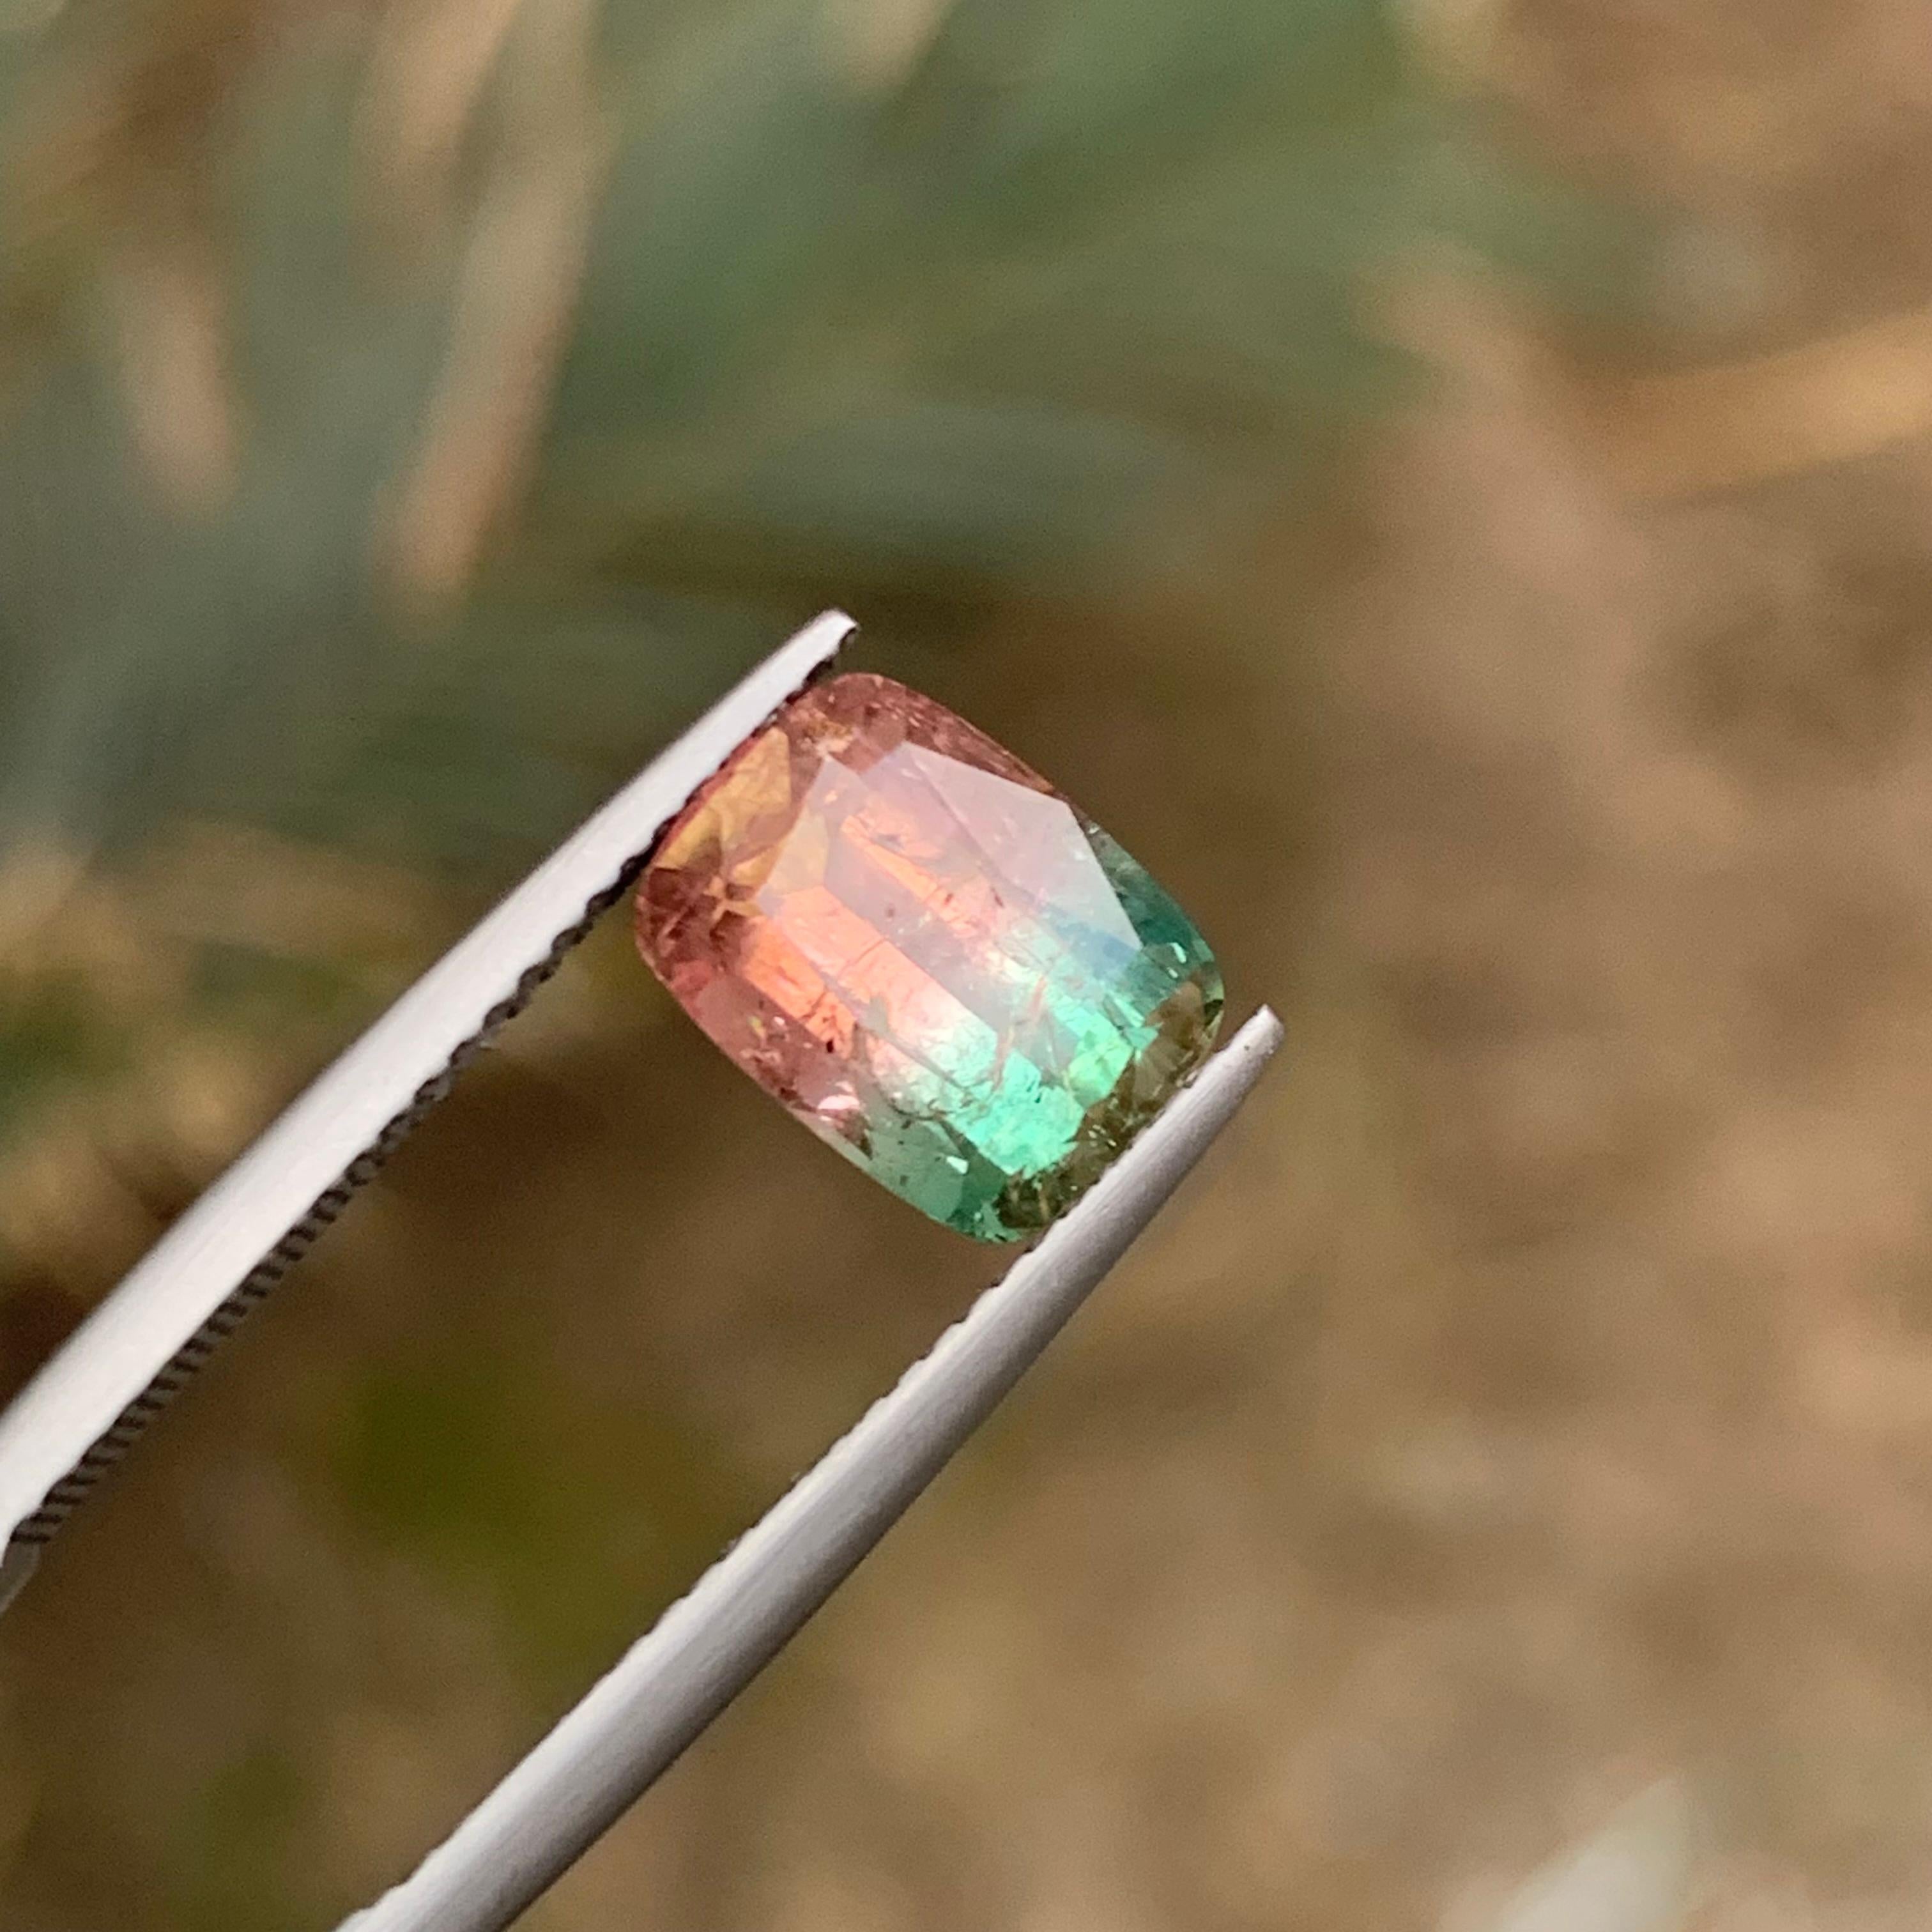 Rare Watermelon Bicolor Tourmaline Gemstone 3.05Ct Cushion Cut for Ring/Jewelry  For Sale 2